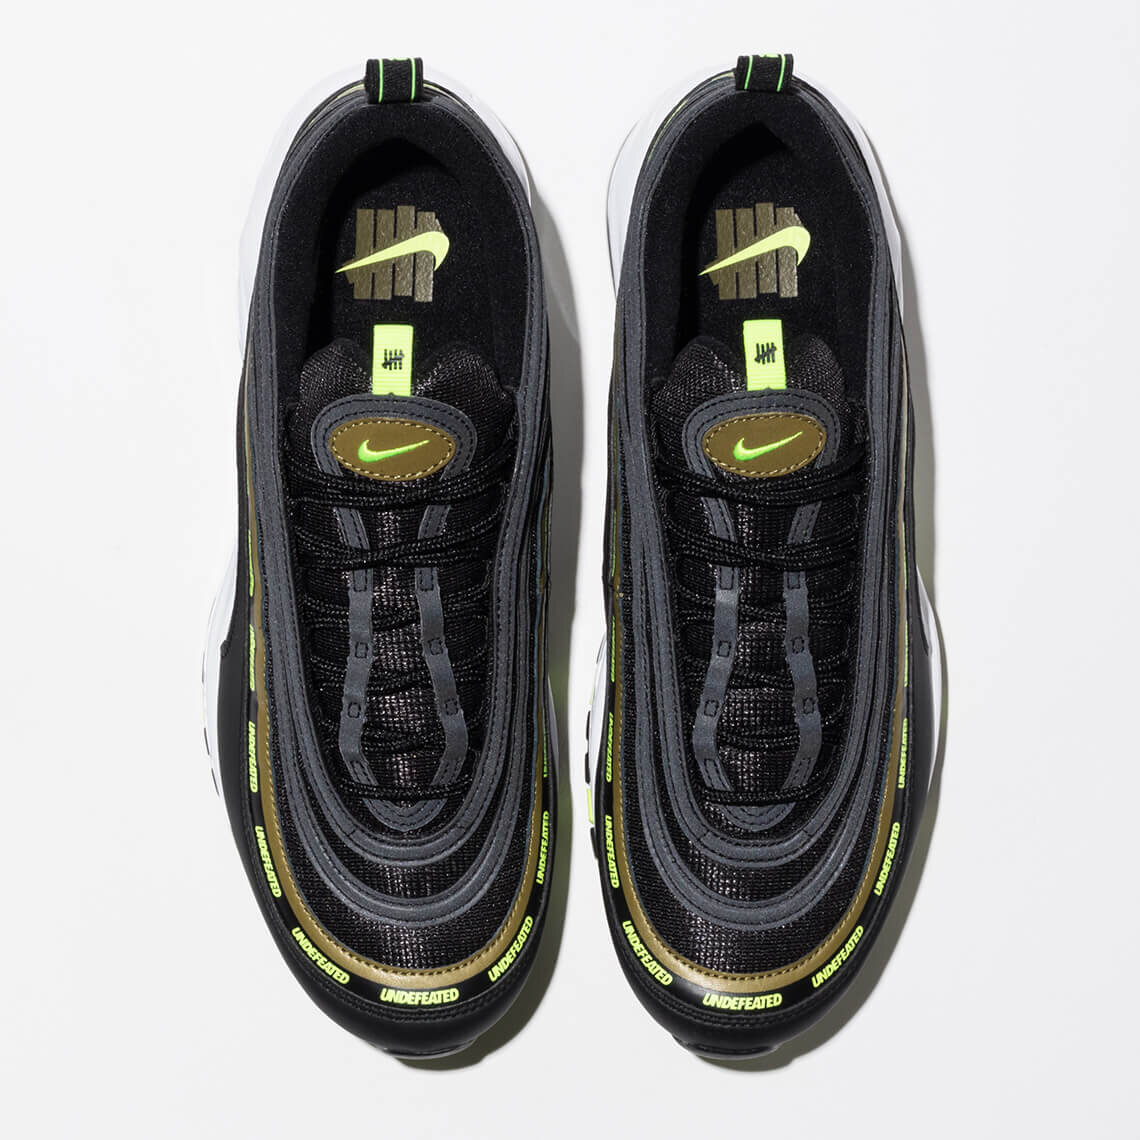 CNK-undefeated-nike-air-max-97-2020-black-insole.jpg